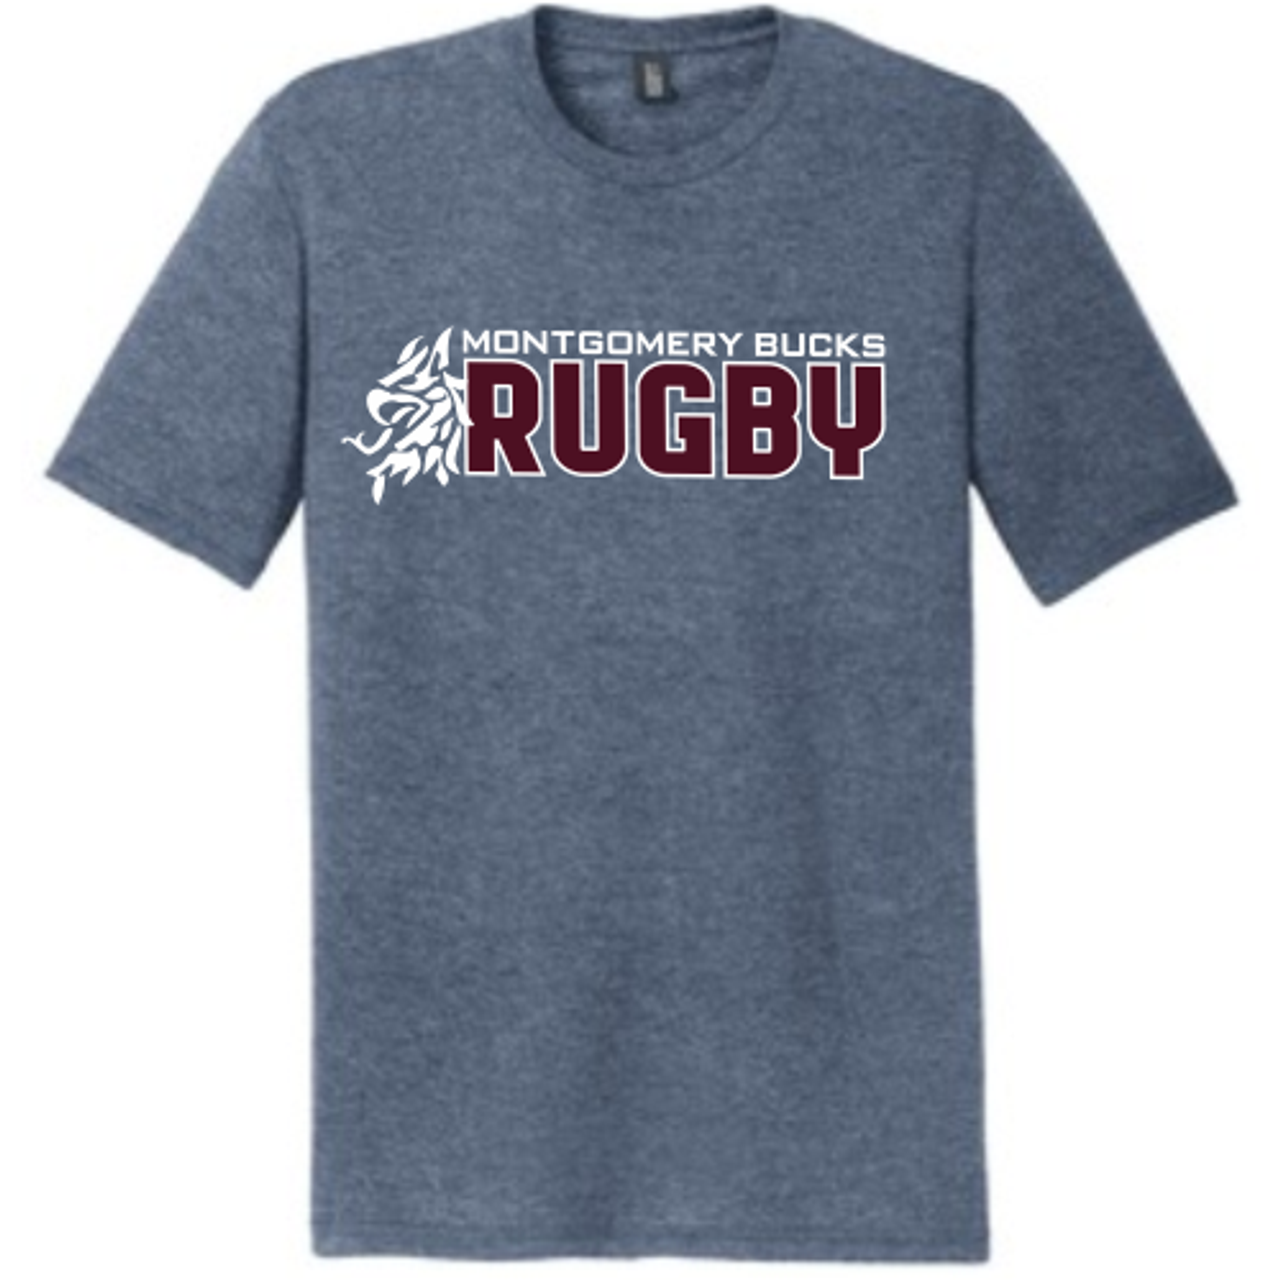 MB Rugby Triblend Tee